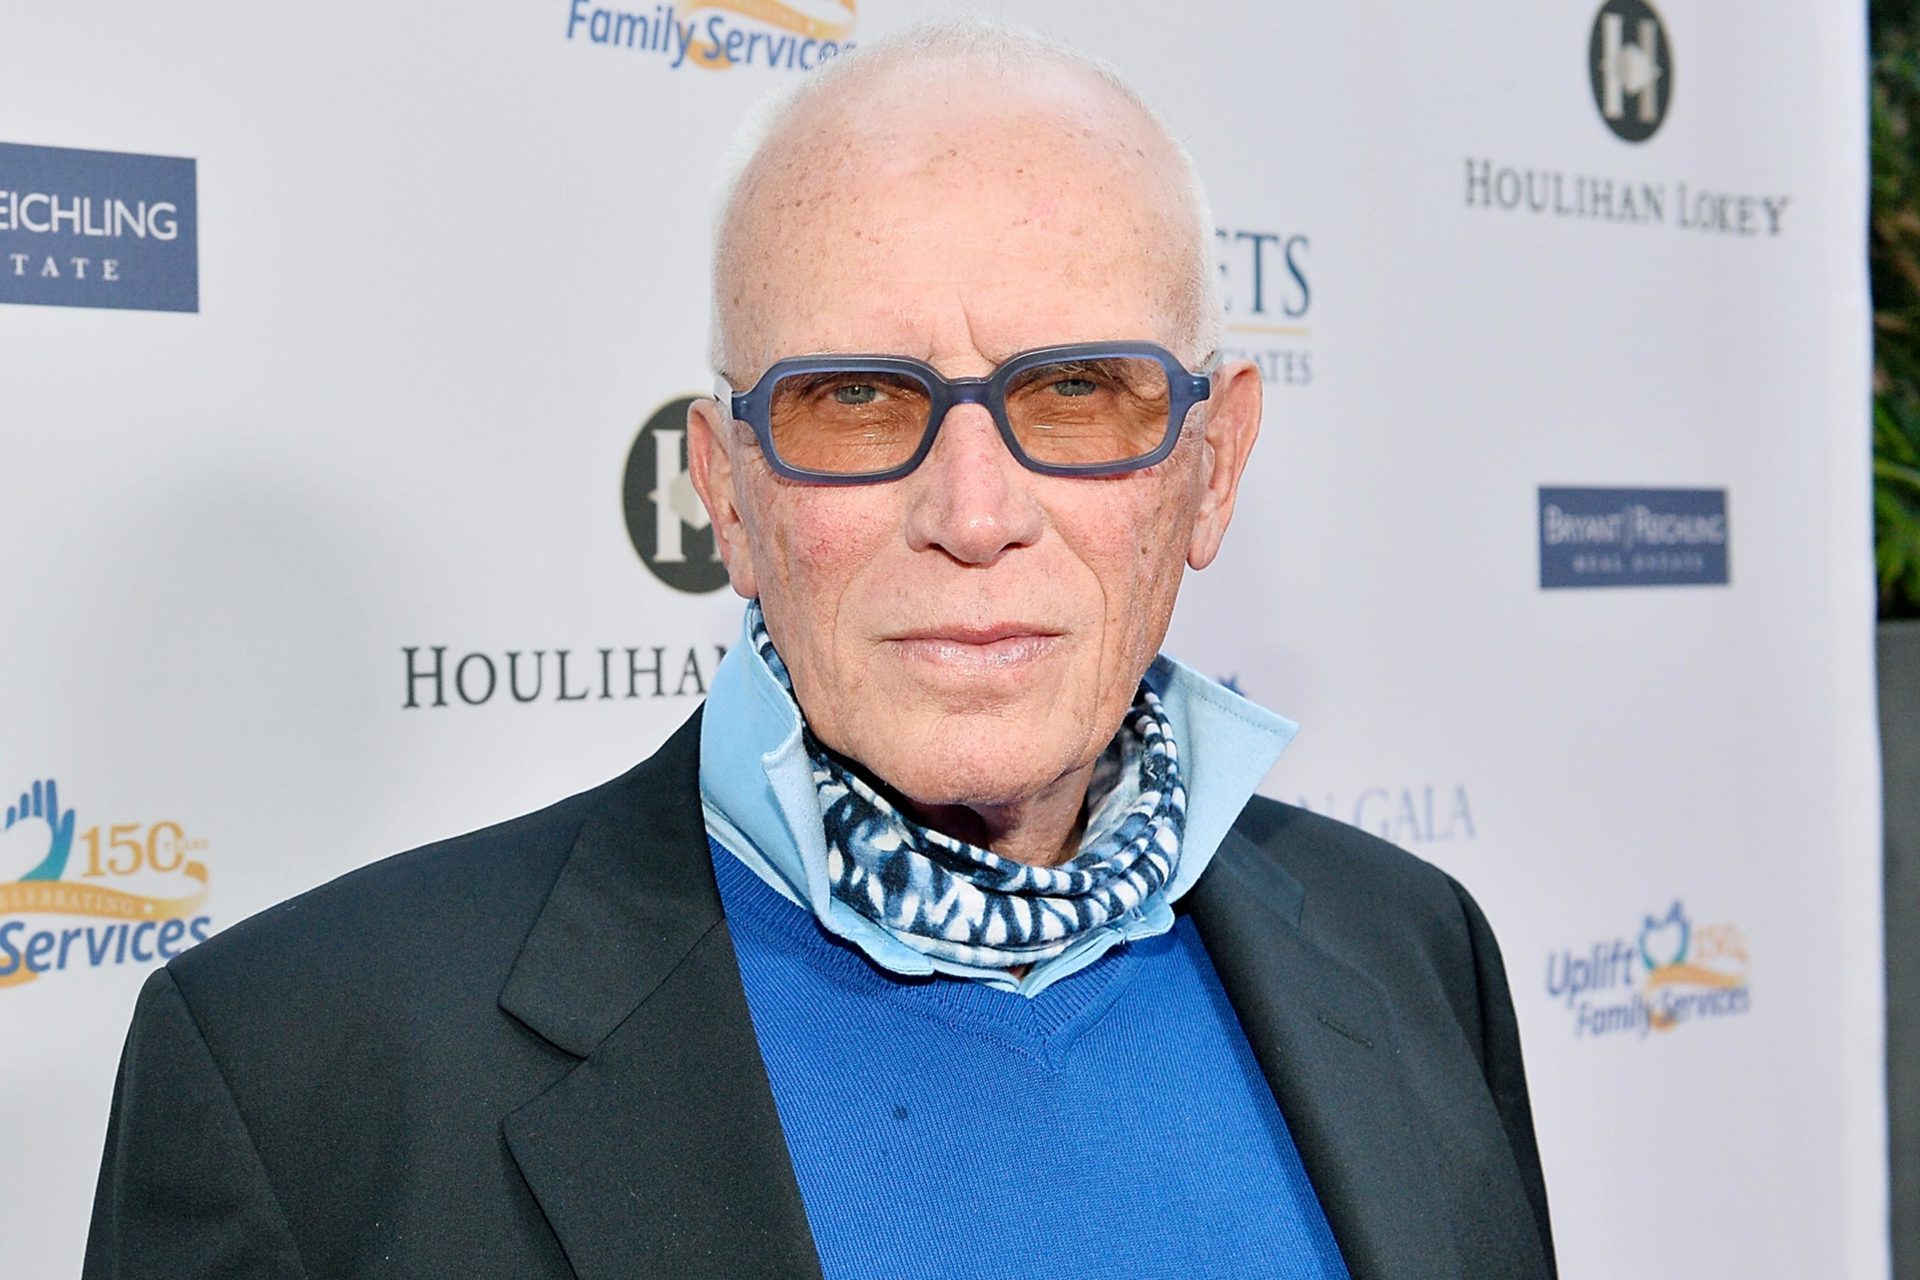 HOLLYWOOD, CA - MAY 18:  Peter Weller attends Uplift Family Services at Hollygrove Gala at W Hollywood on May 18, 2017 in Hollywood, California.  (Photo by Stefanie Keenan/Getty Images for Uplift Family Services)